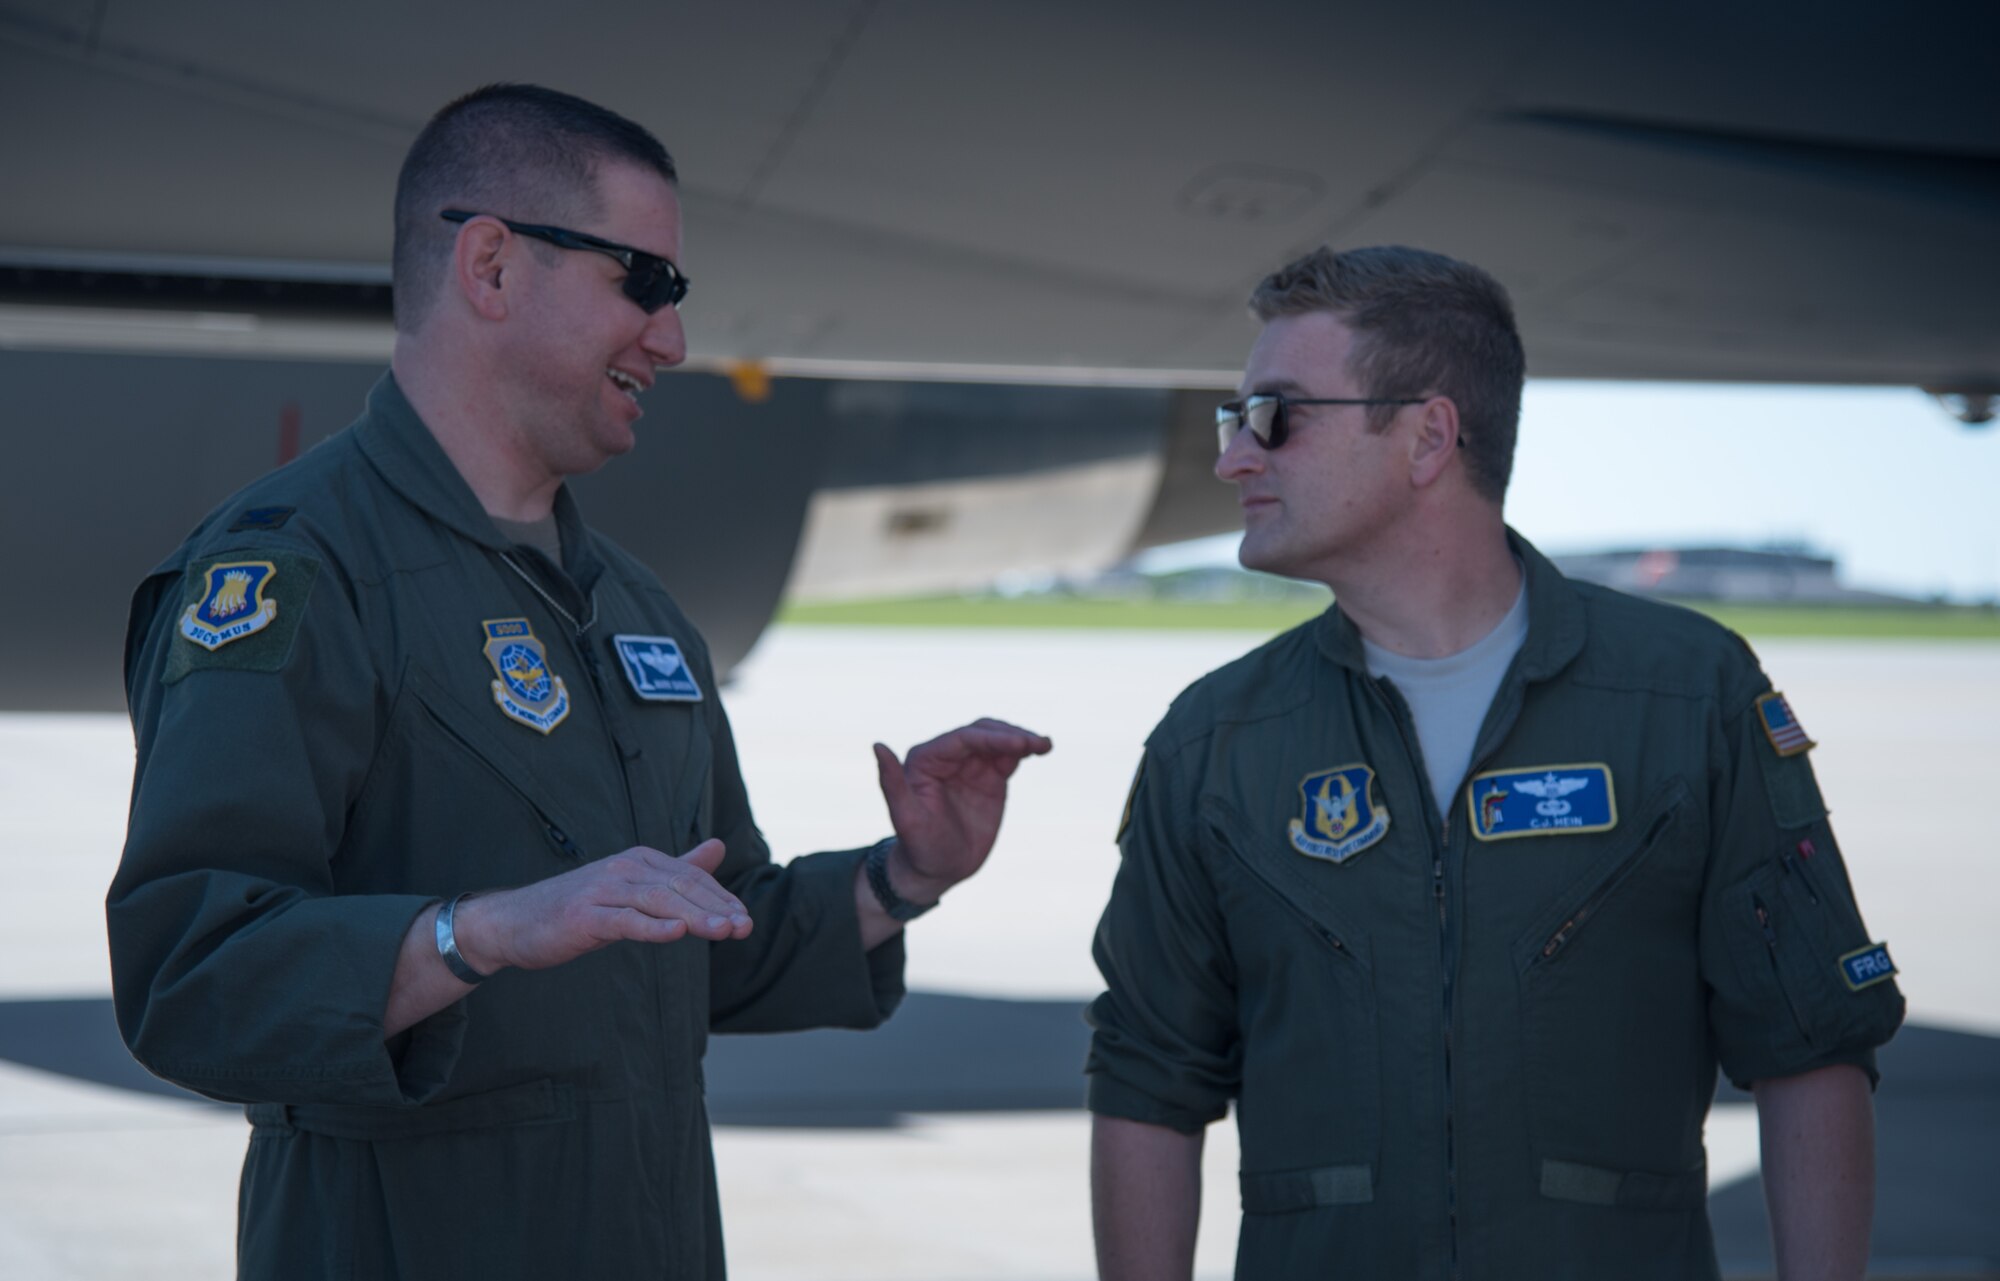 Col. Mark Baran, 22nd Air Refueling Wing vice commander, talks to Maj. Charles Hein, 18th Air Refueling Squadron KC-46 Pegasus pilot, before a flight, May 19, 2020 at McConnell Air Force Base, Kansas. Through Baran’s many career milestones he has honored Lt. Col. Fredric M. Mellory, Missing in Action Vietnam F-101 Voodoo pilot, by wearing a memorial bracelet. (U.S. Air Force photo by Senior Airman Michaela Slanchik)